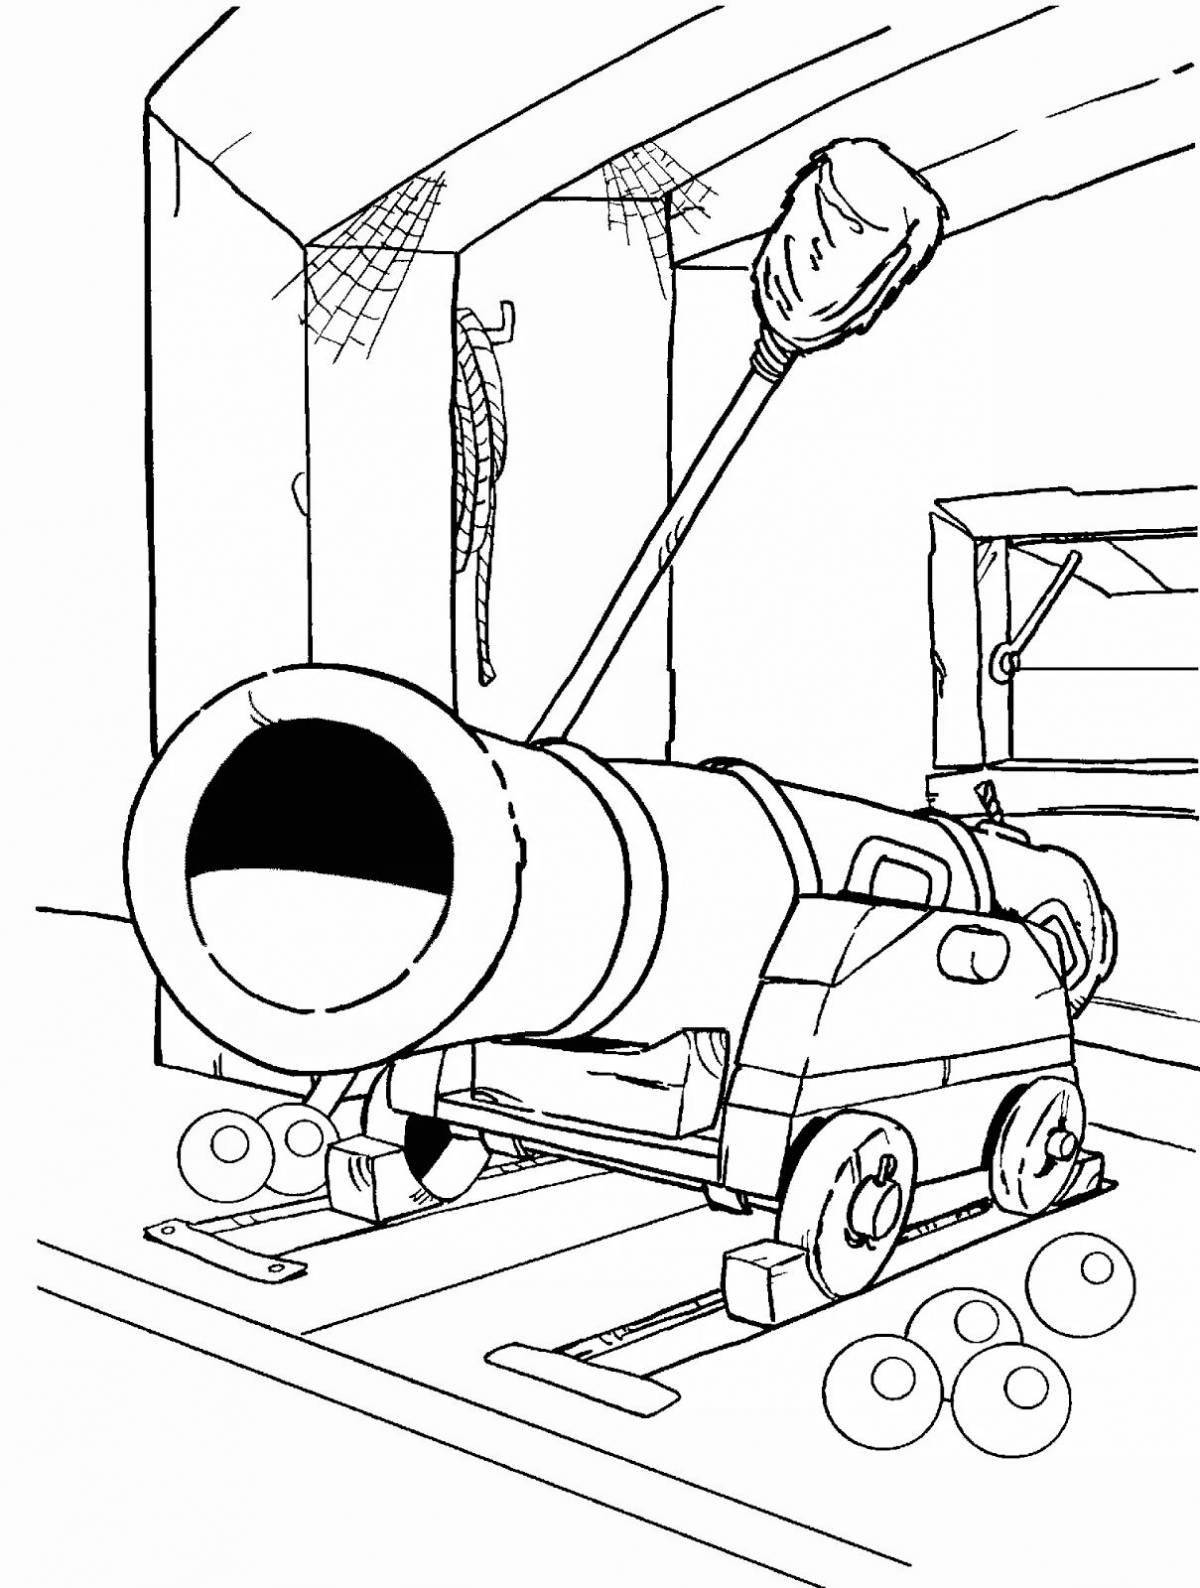 Playful king cannon coloring page for kids